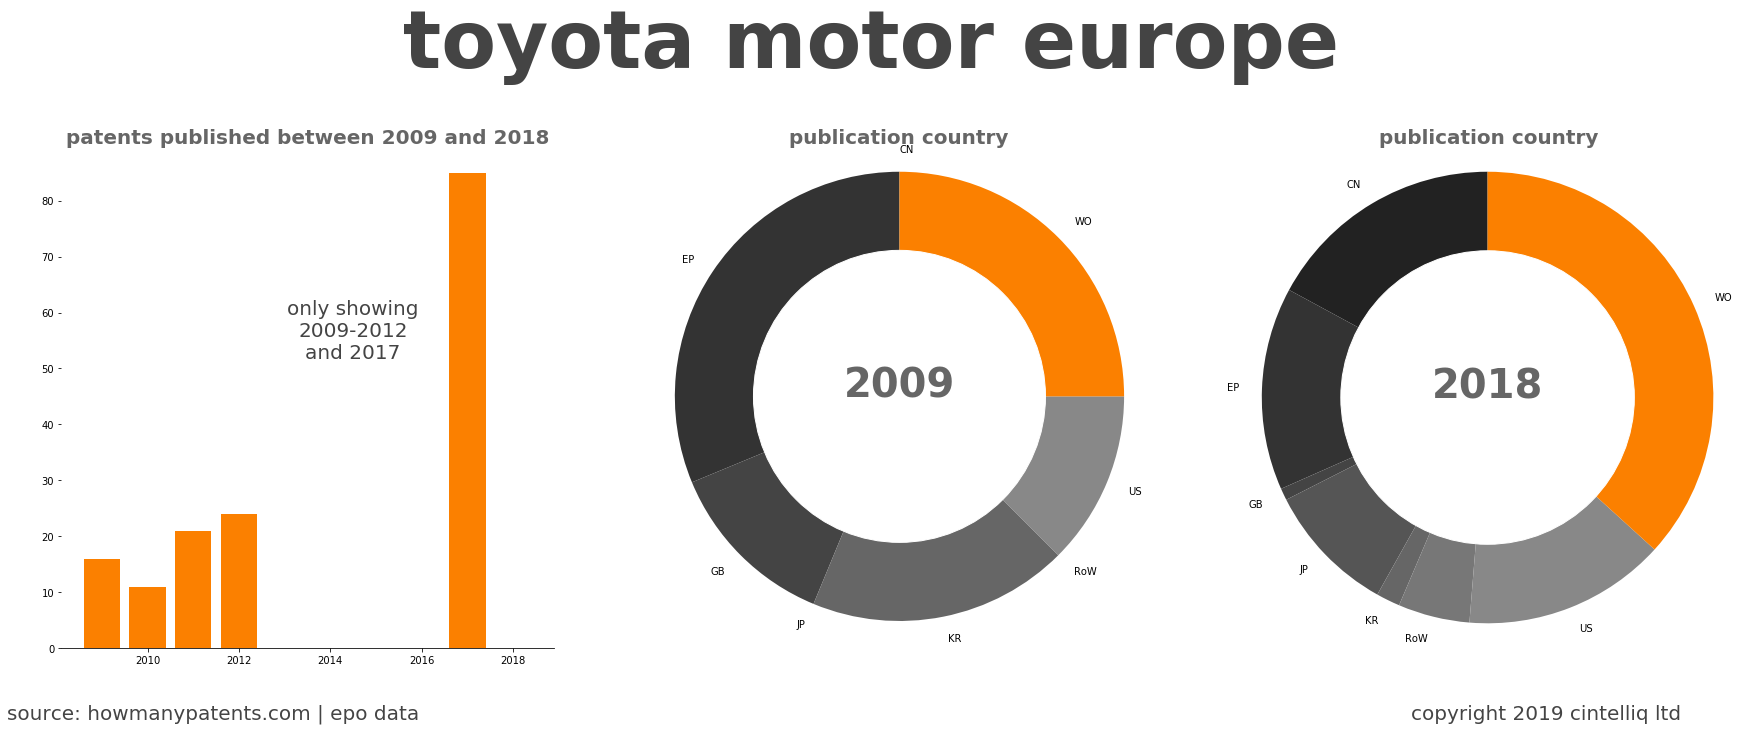 summary of patents for Toyota Motor Europe